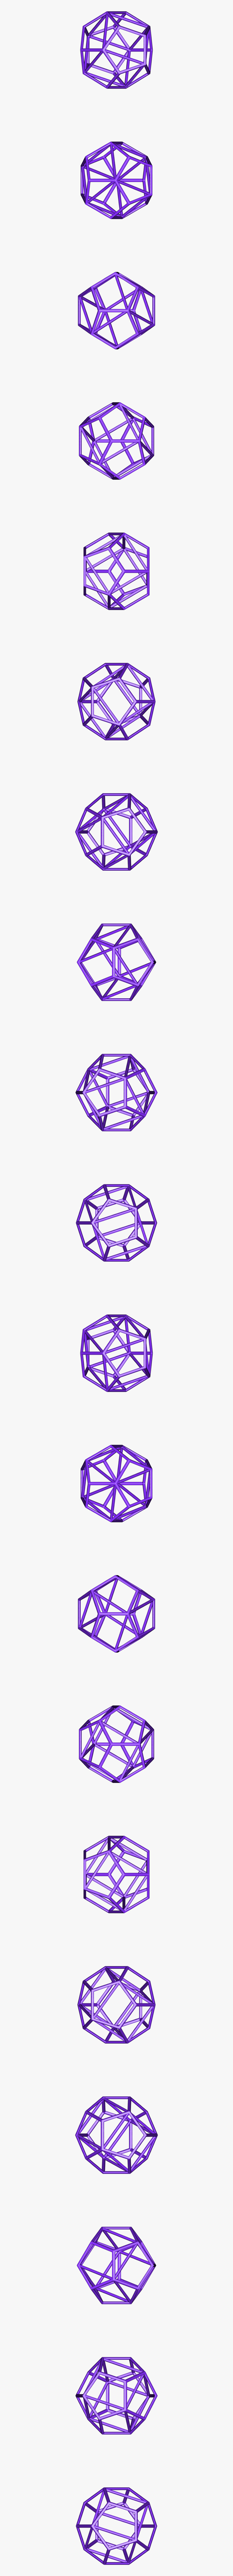 Dodecahedron Png, Transparent Png, Free Download